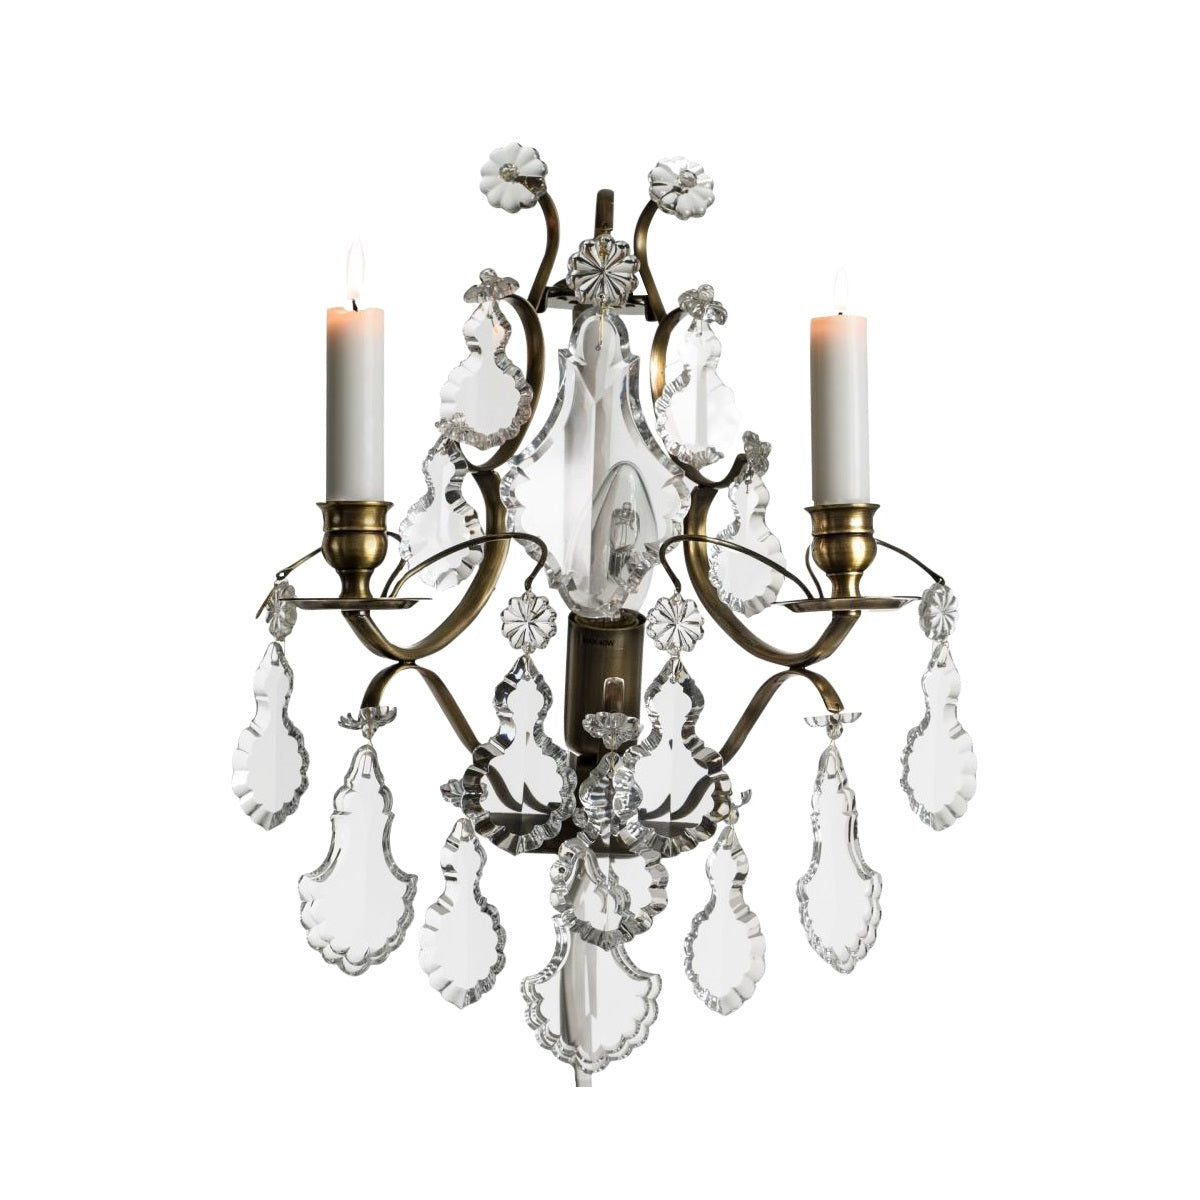 Baroque Dark Brass Wall Sconce with pendeloque crystals